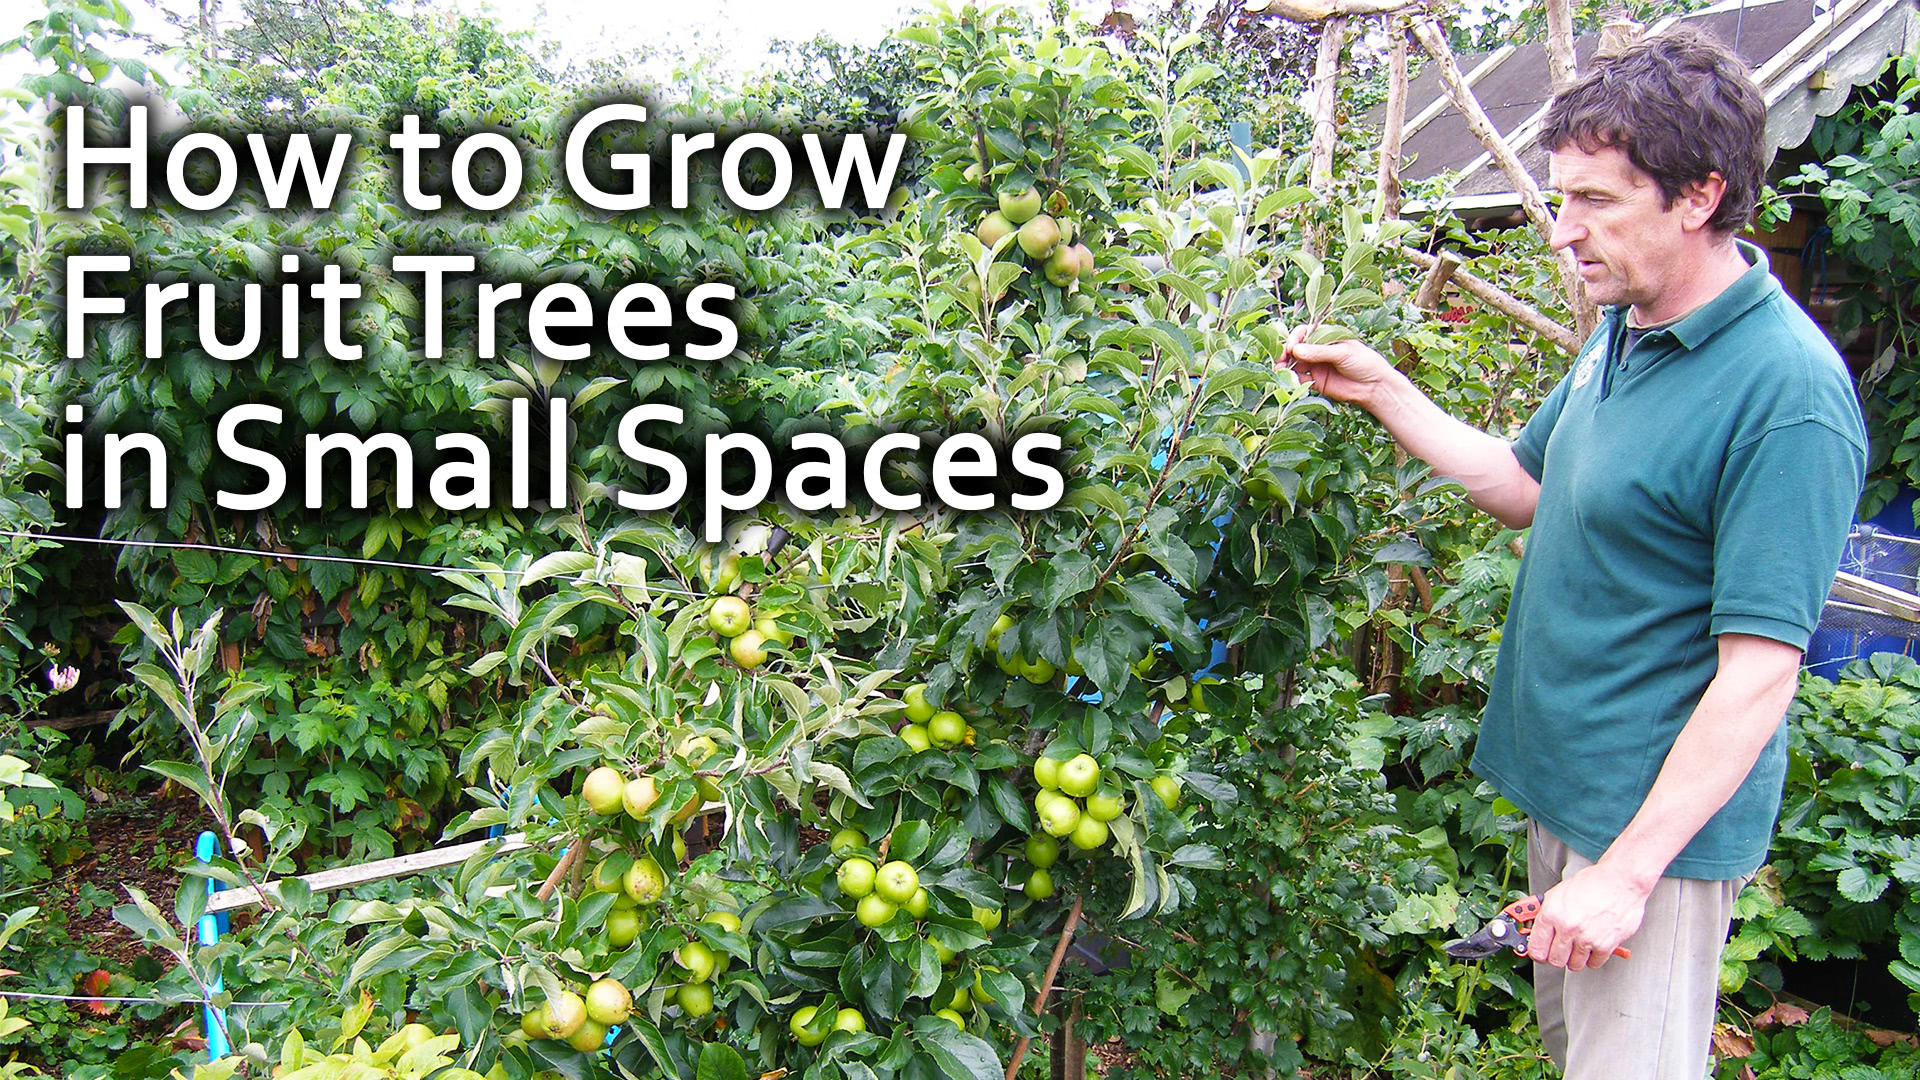 How to Grow Fruit Trees in Small Spaces